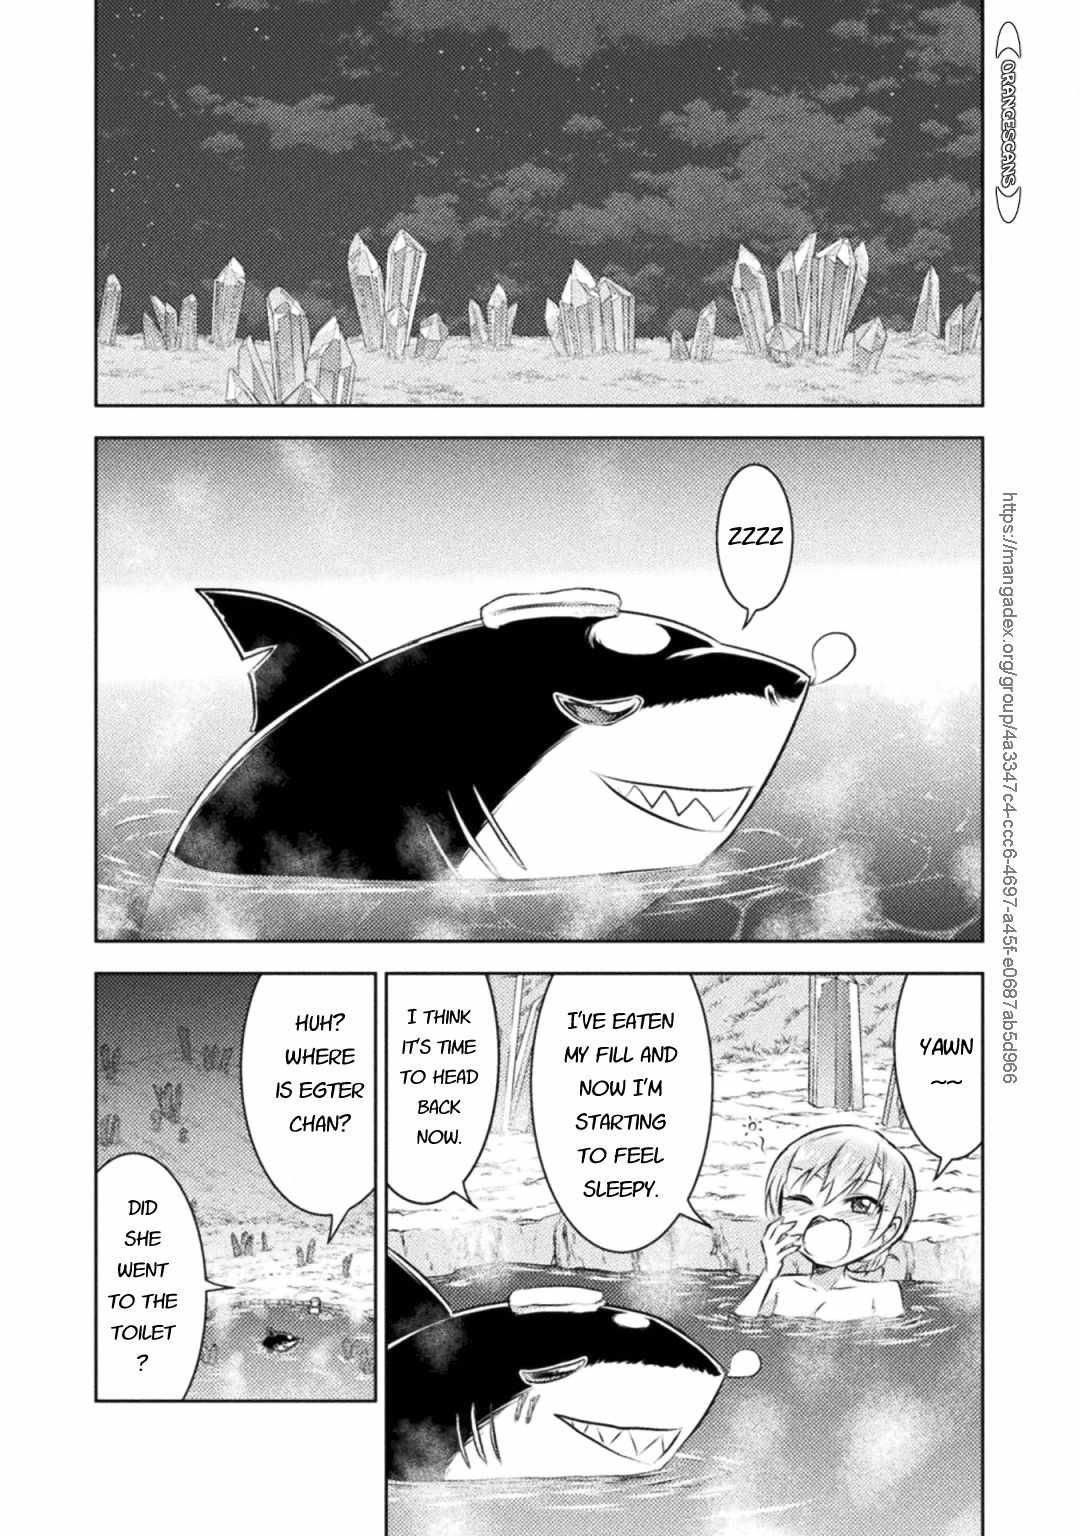 Killer Shark In Another World - 27 page 27-3e9229fc